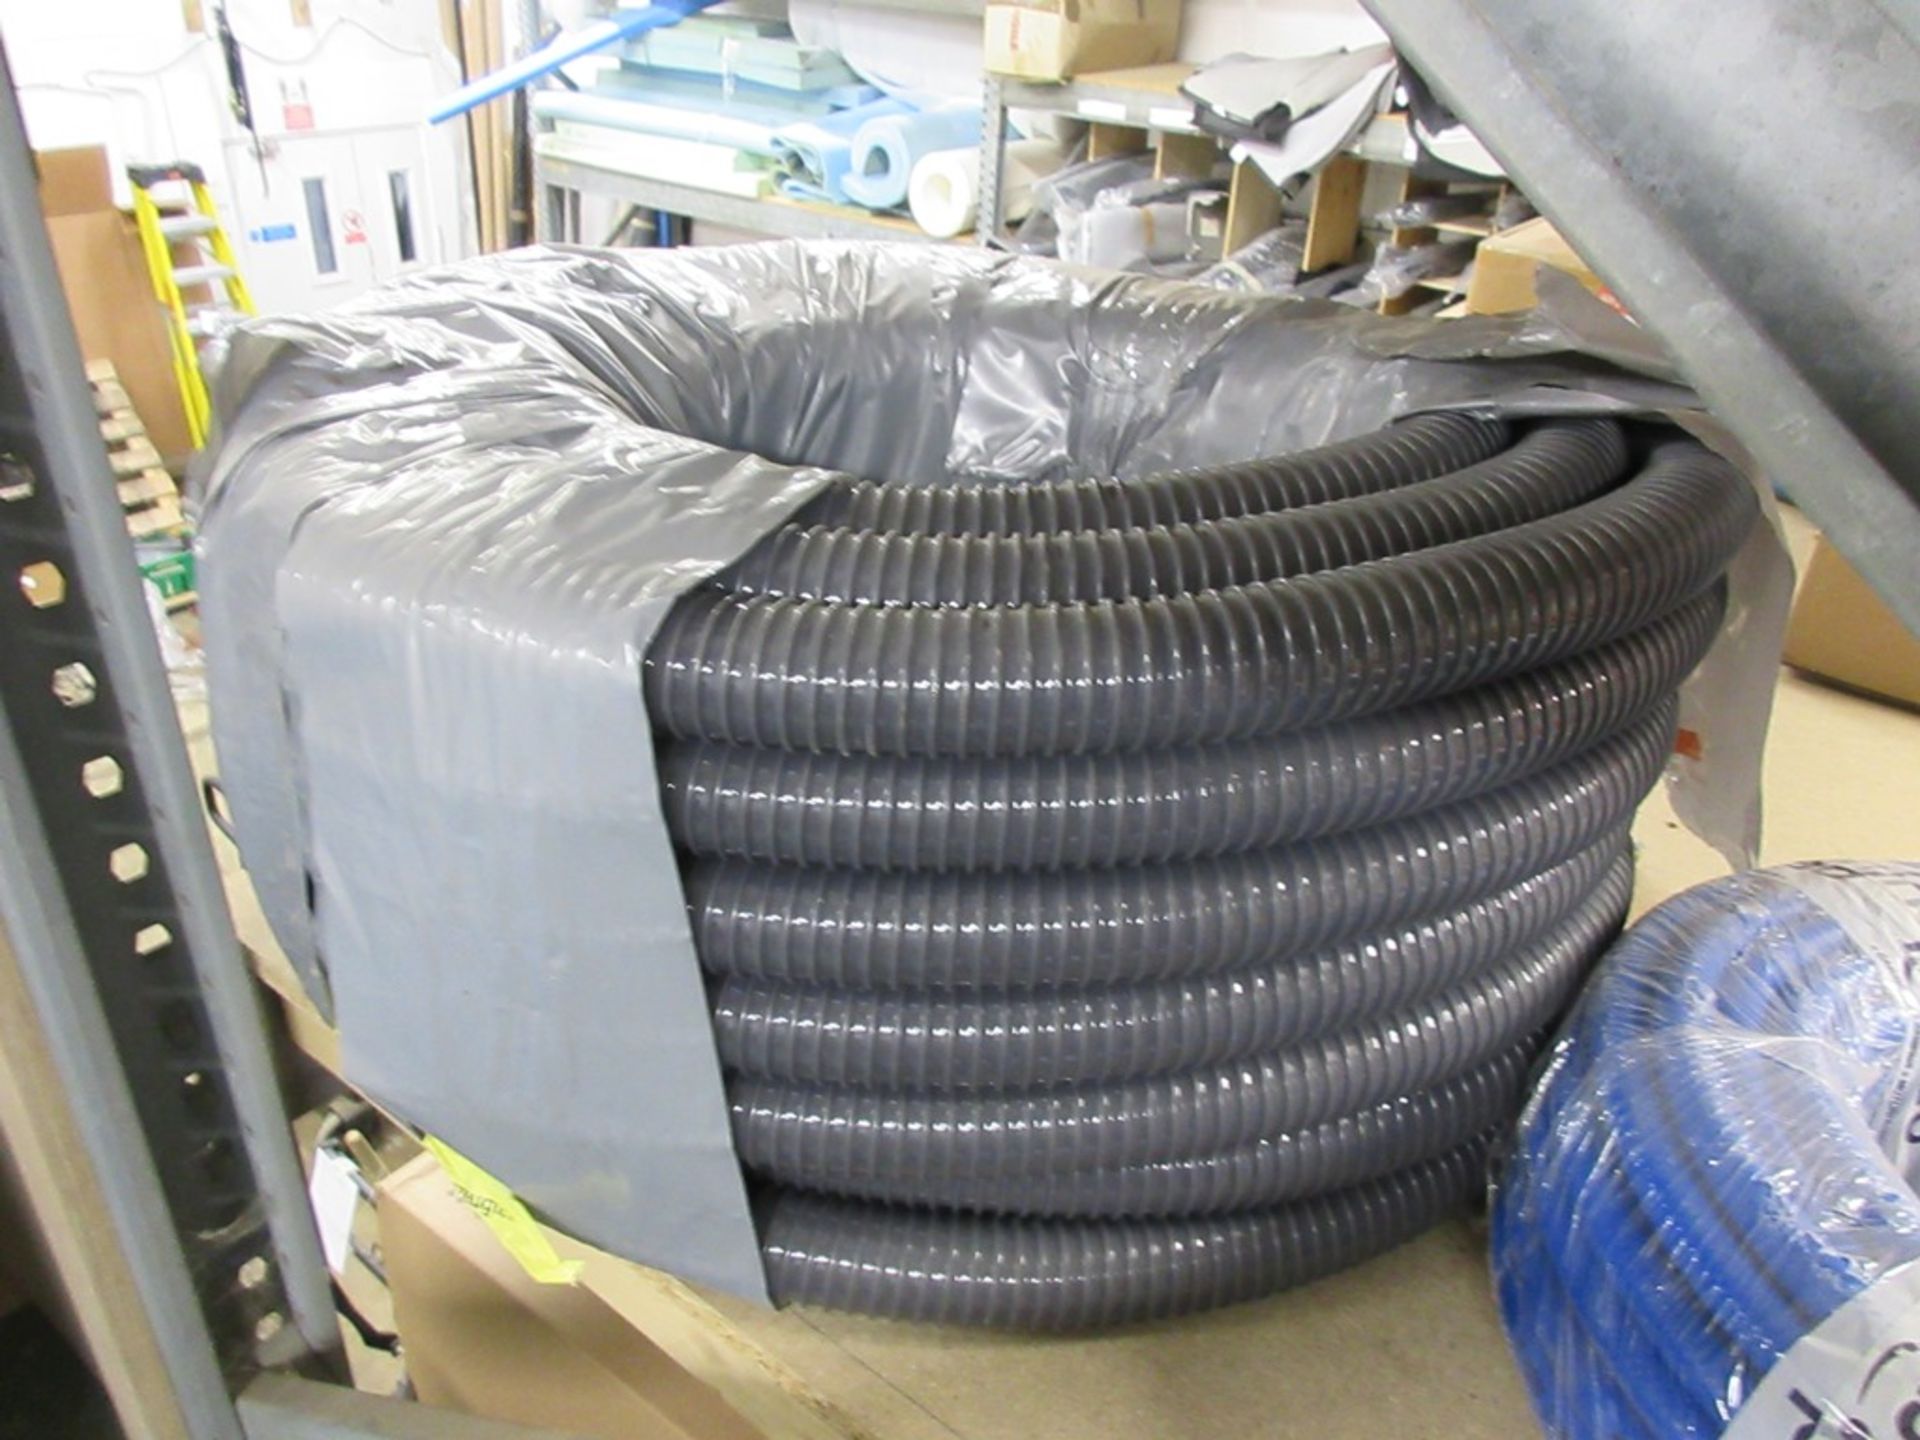 Copely 12.5mm x 18.5 reinforced PVC hose, 30m, 1 x conduit piping - Image 3 of 4